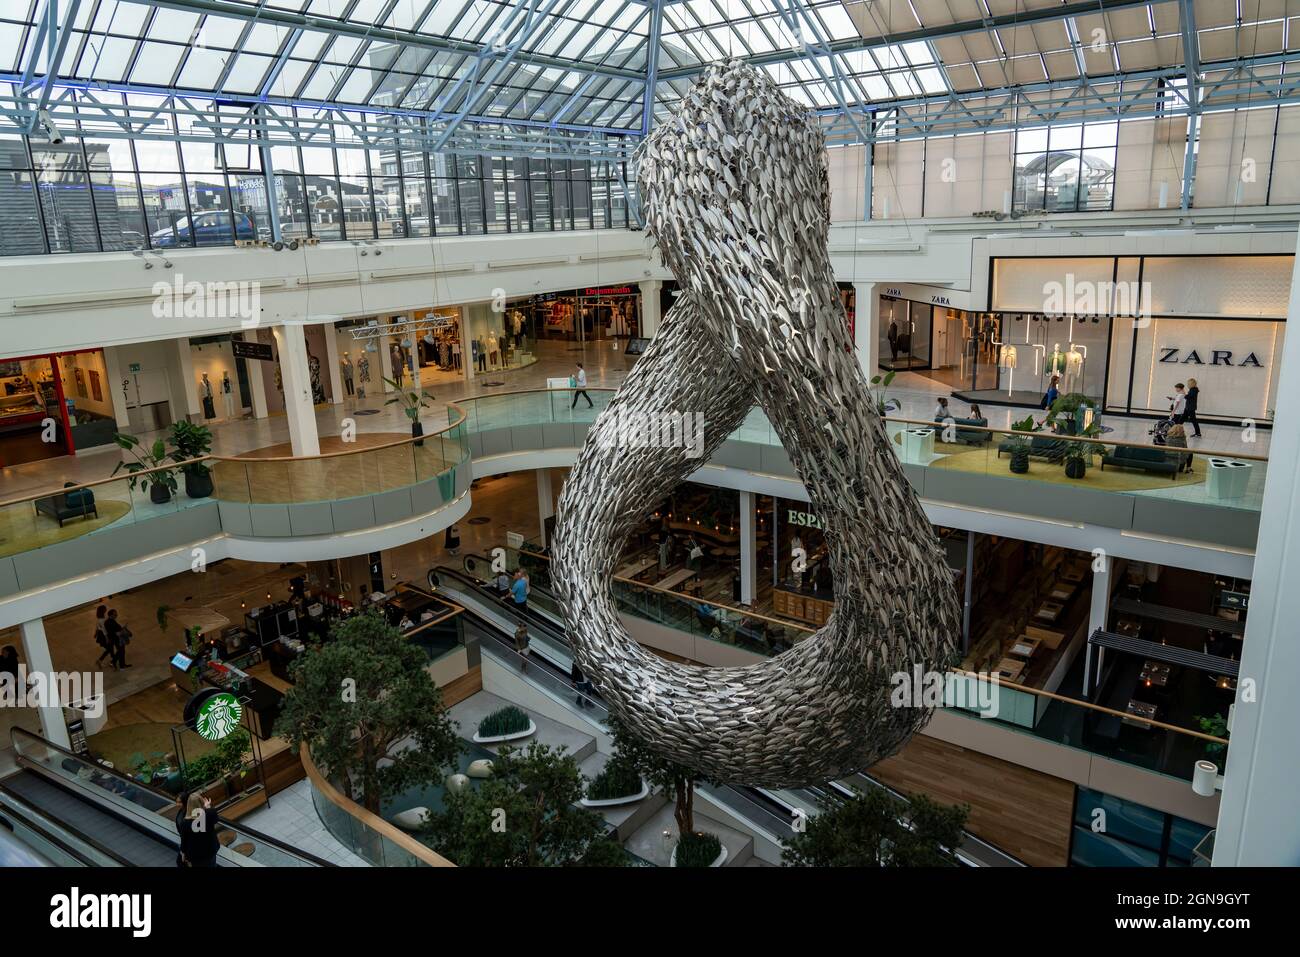 Shopping Mall Sculpture High Resolution Stock Photography and Images - Alamy